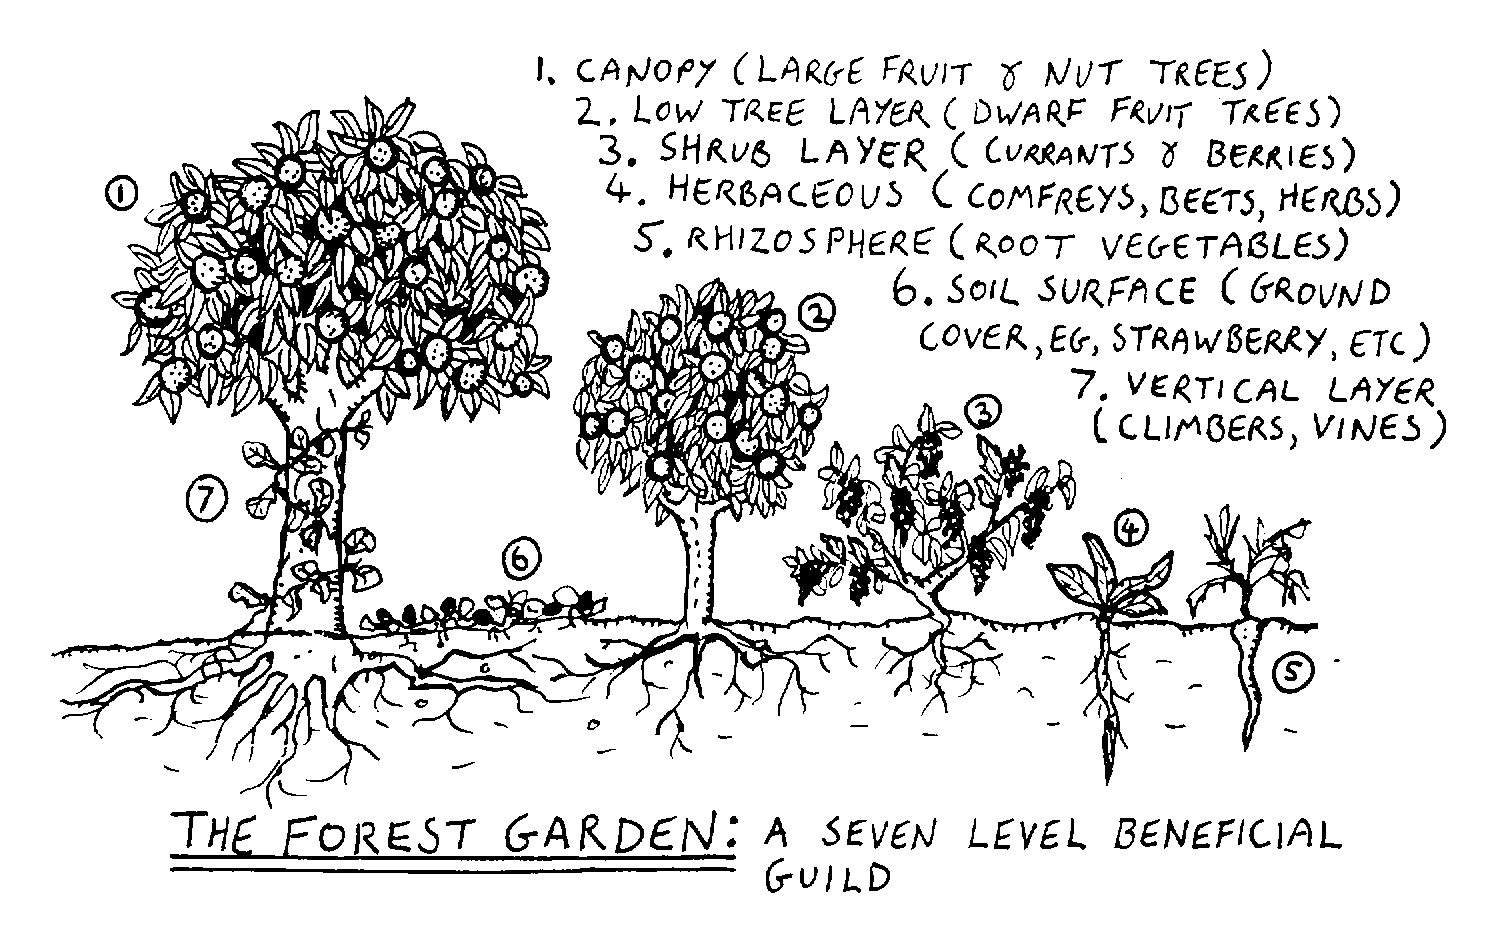 Hand-drawn forest garden diagram showing the seven layers of a forest